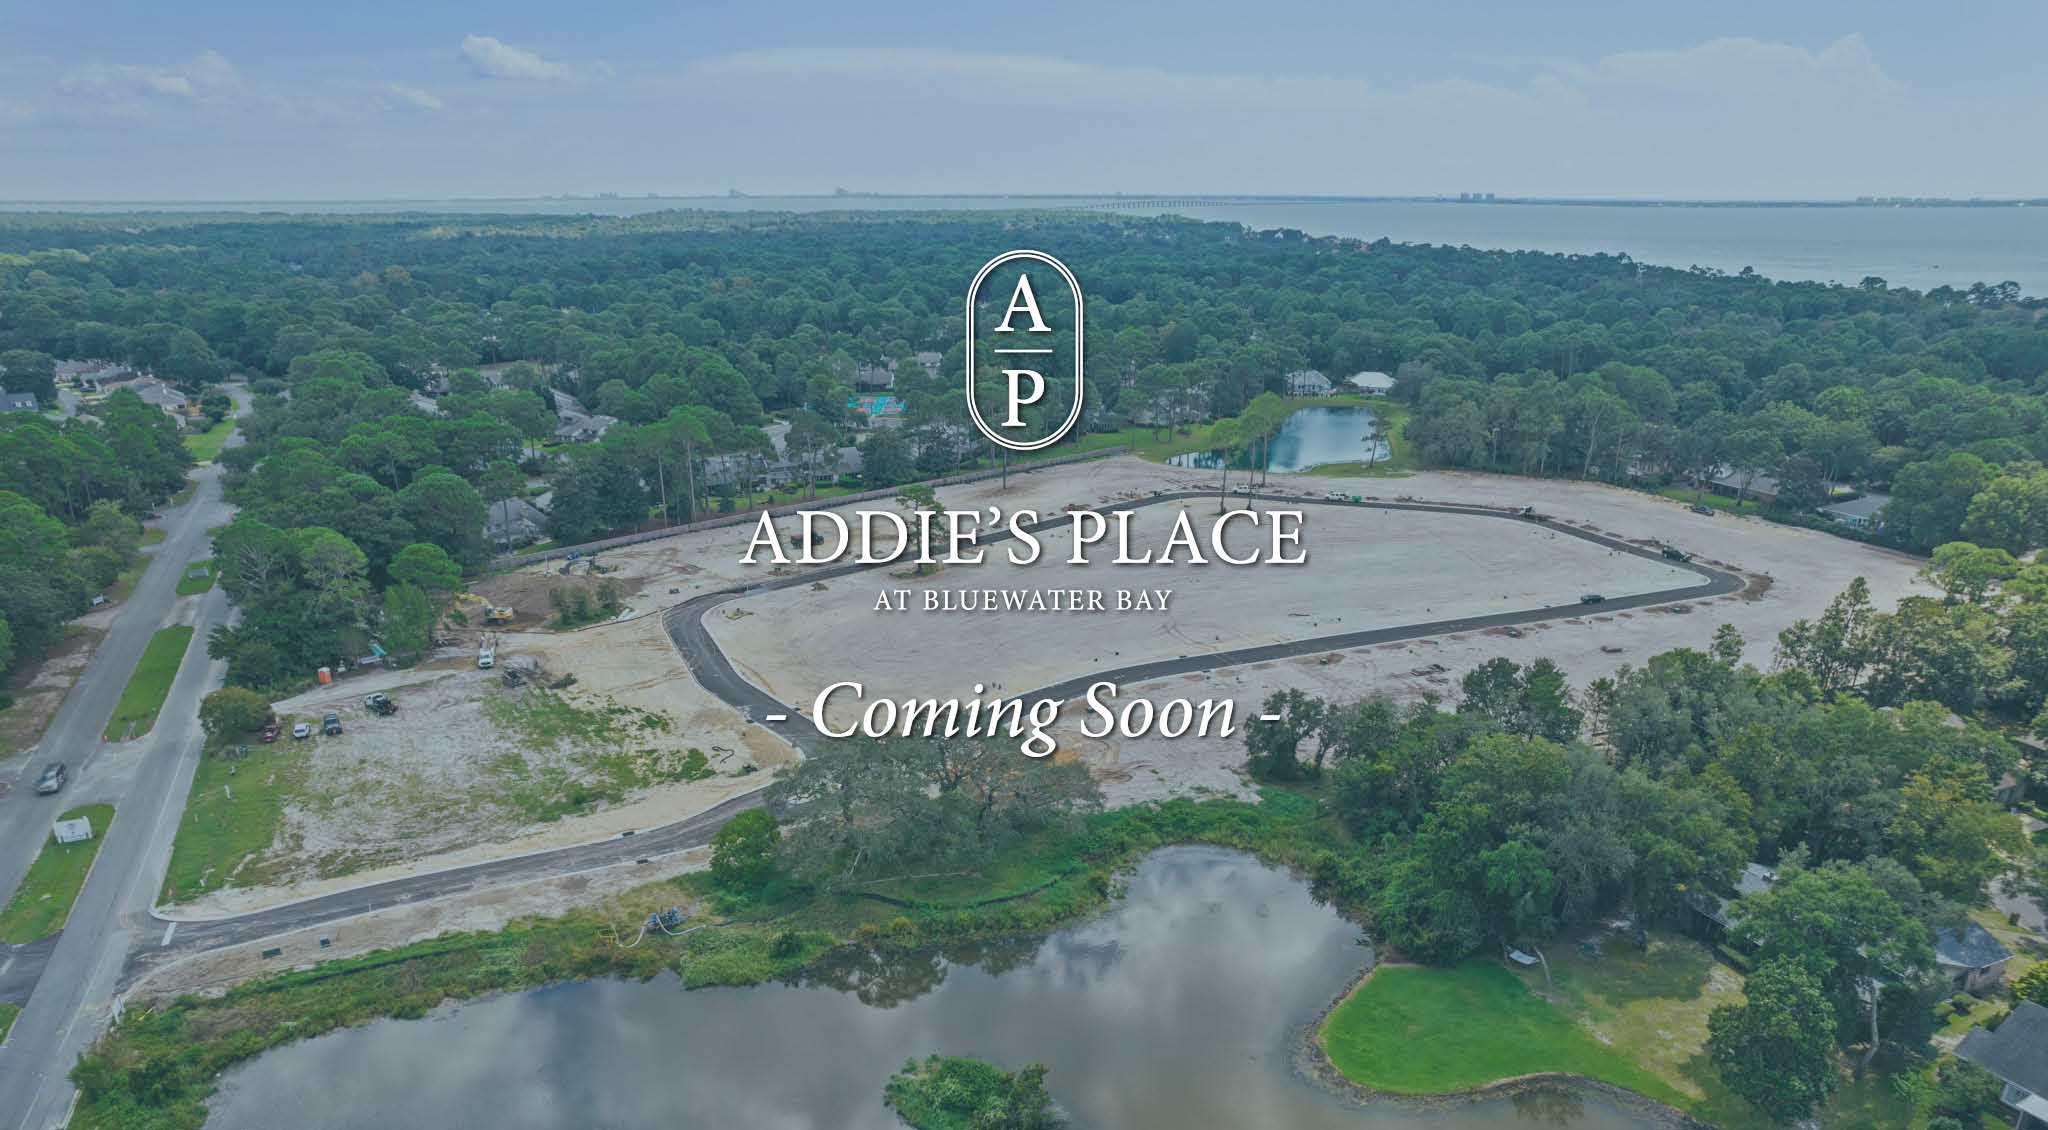 Addie's Place Sept 2022 Construction Update